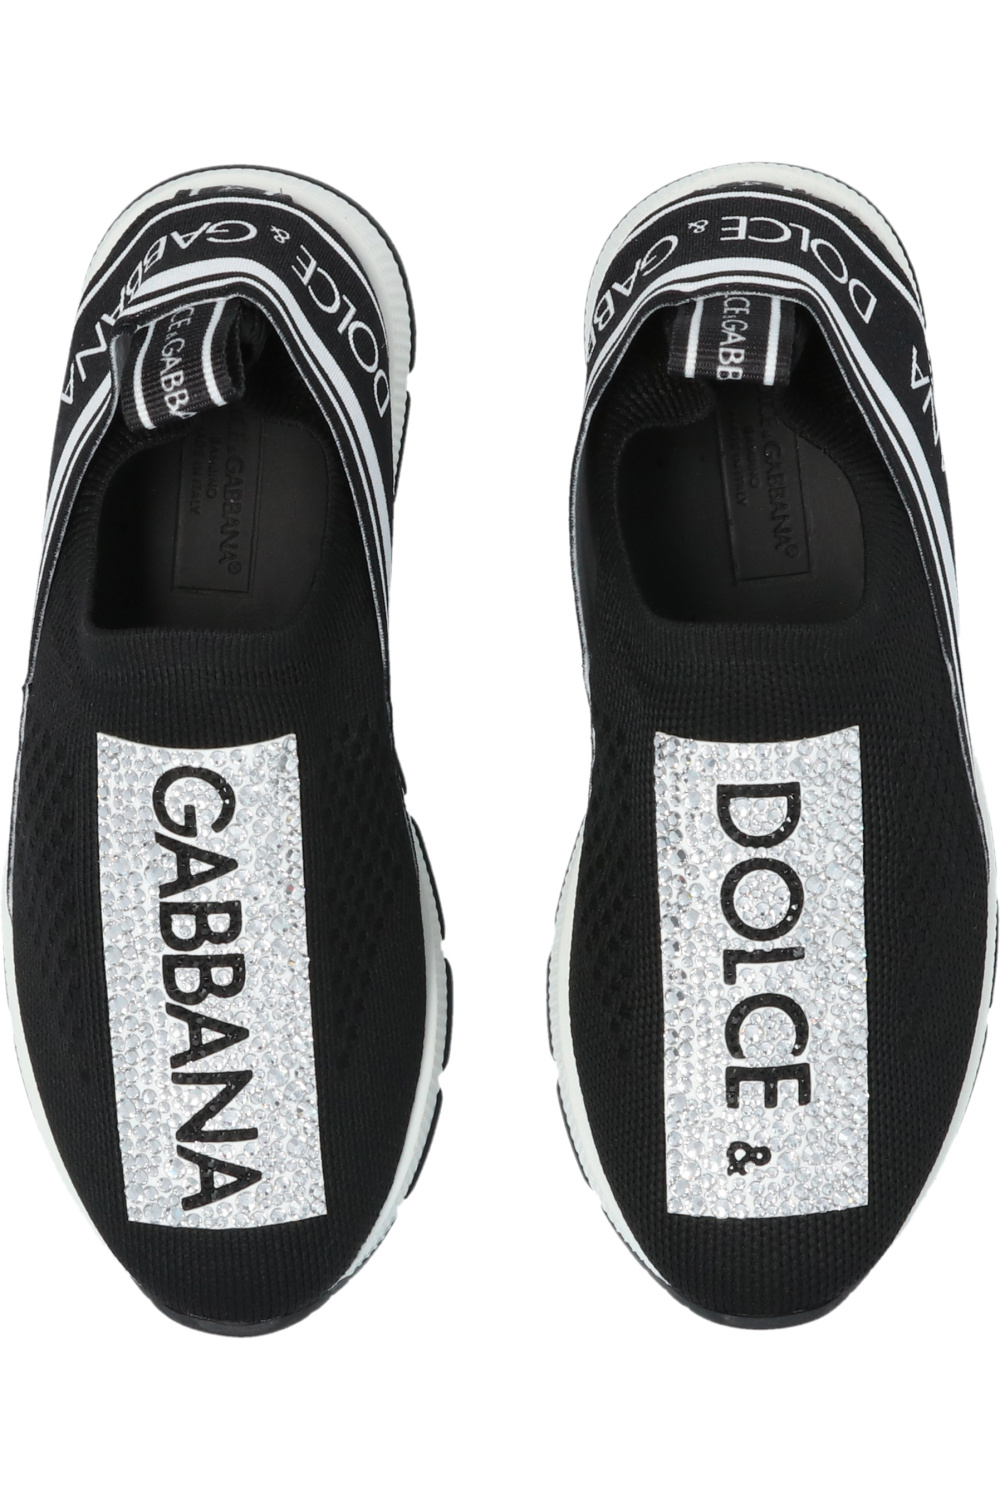 dolce gabbana dg logo pearl embellished brooch item Sneakers with logo